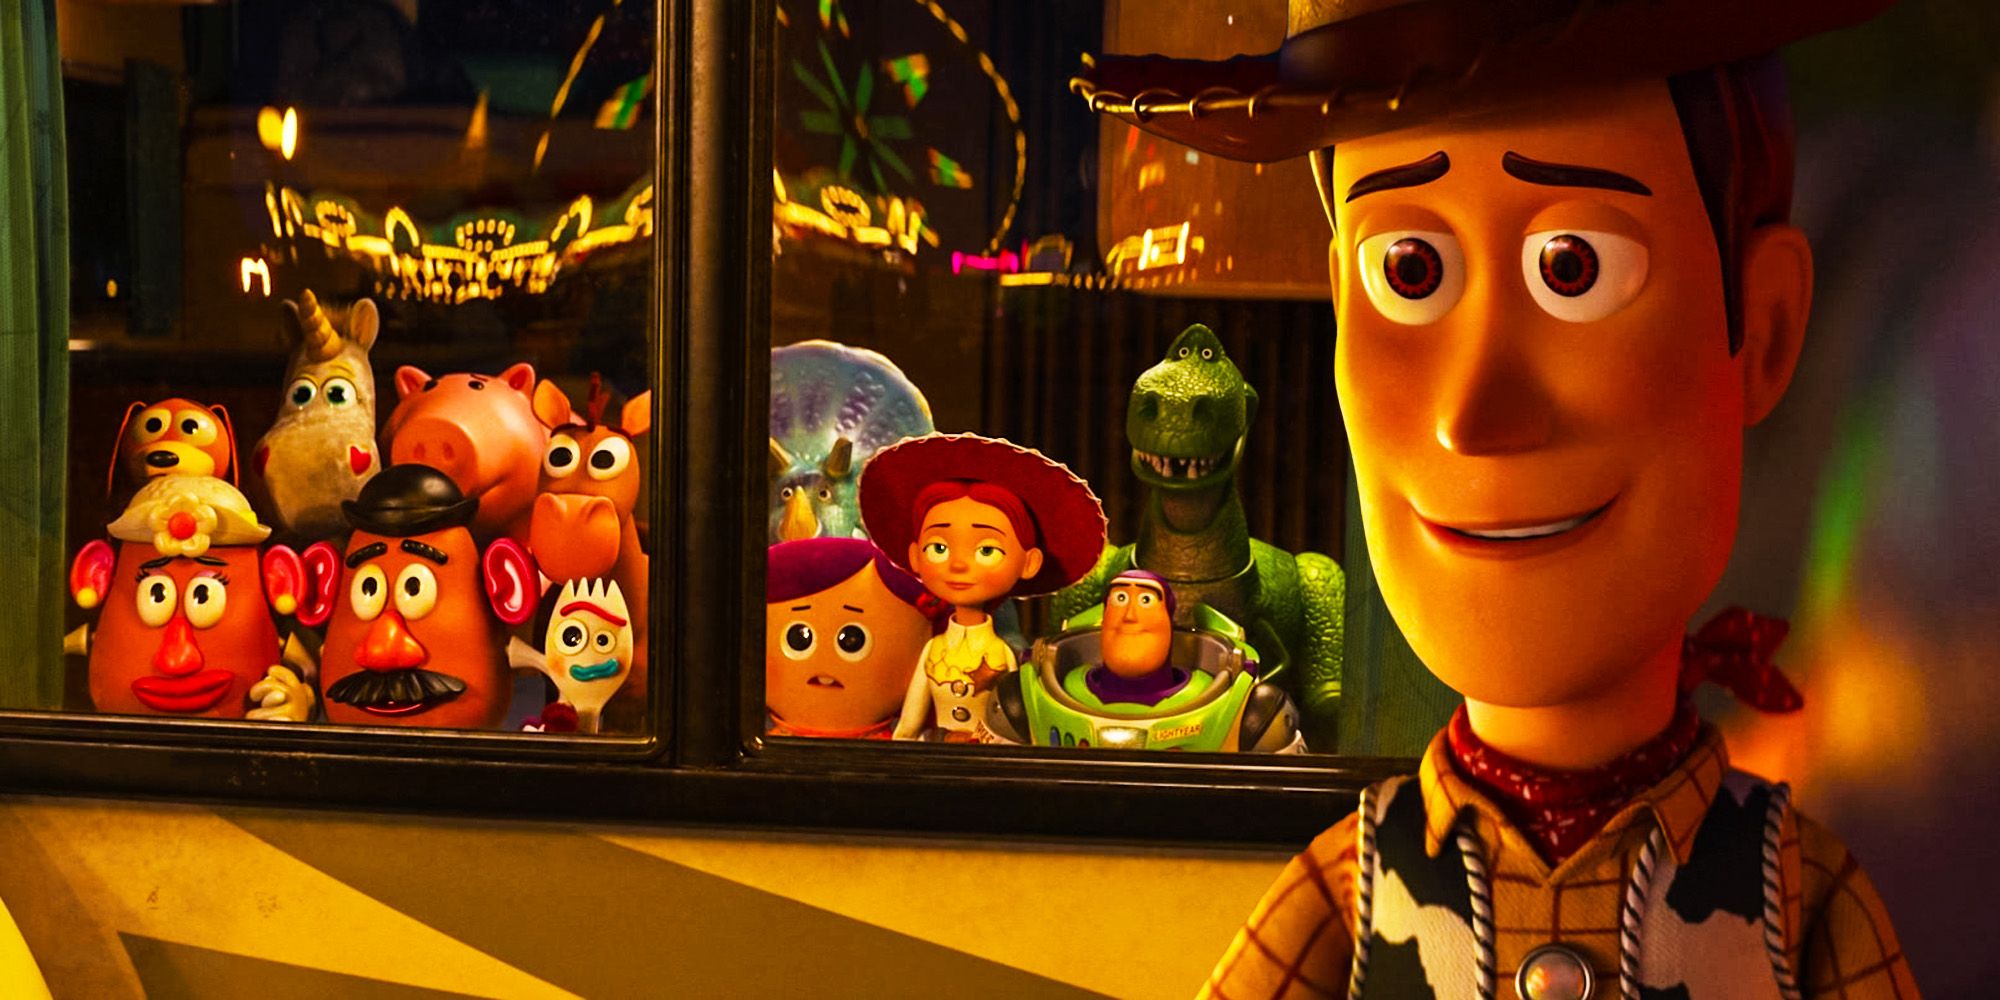 The ONLY WAY Toy Story 5 will work